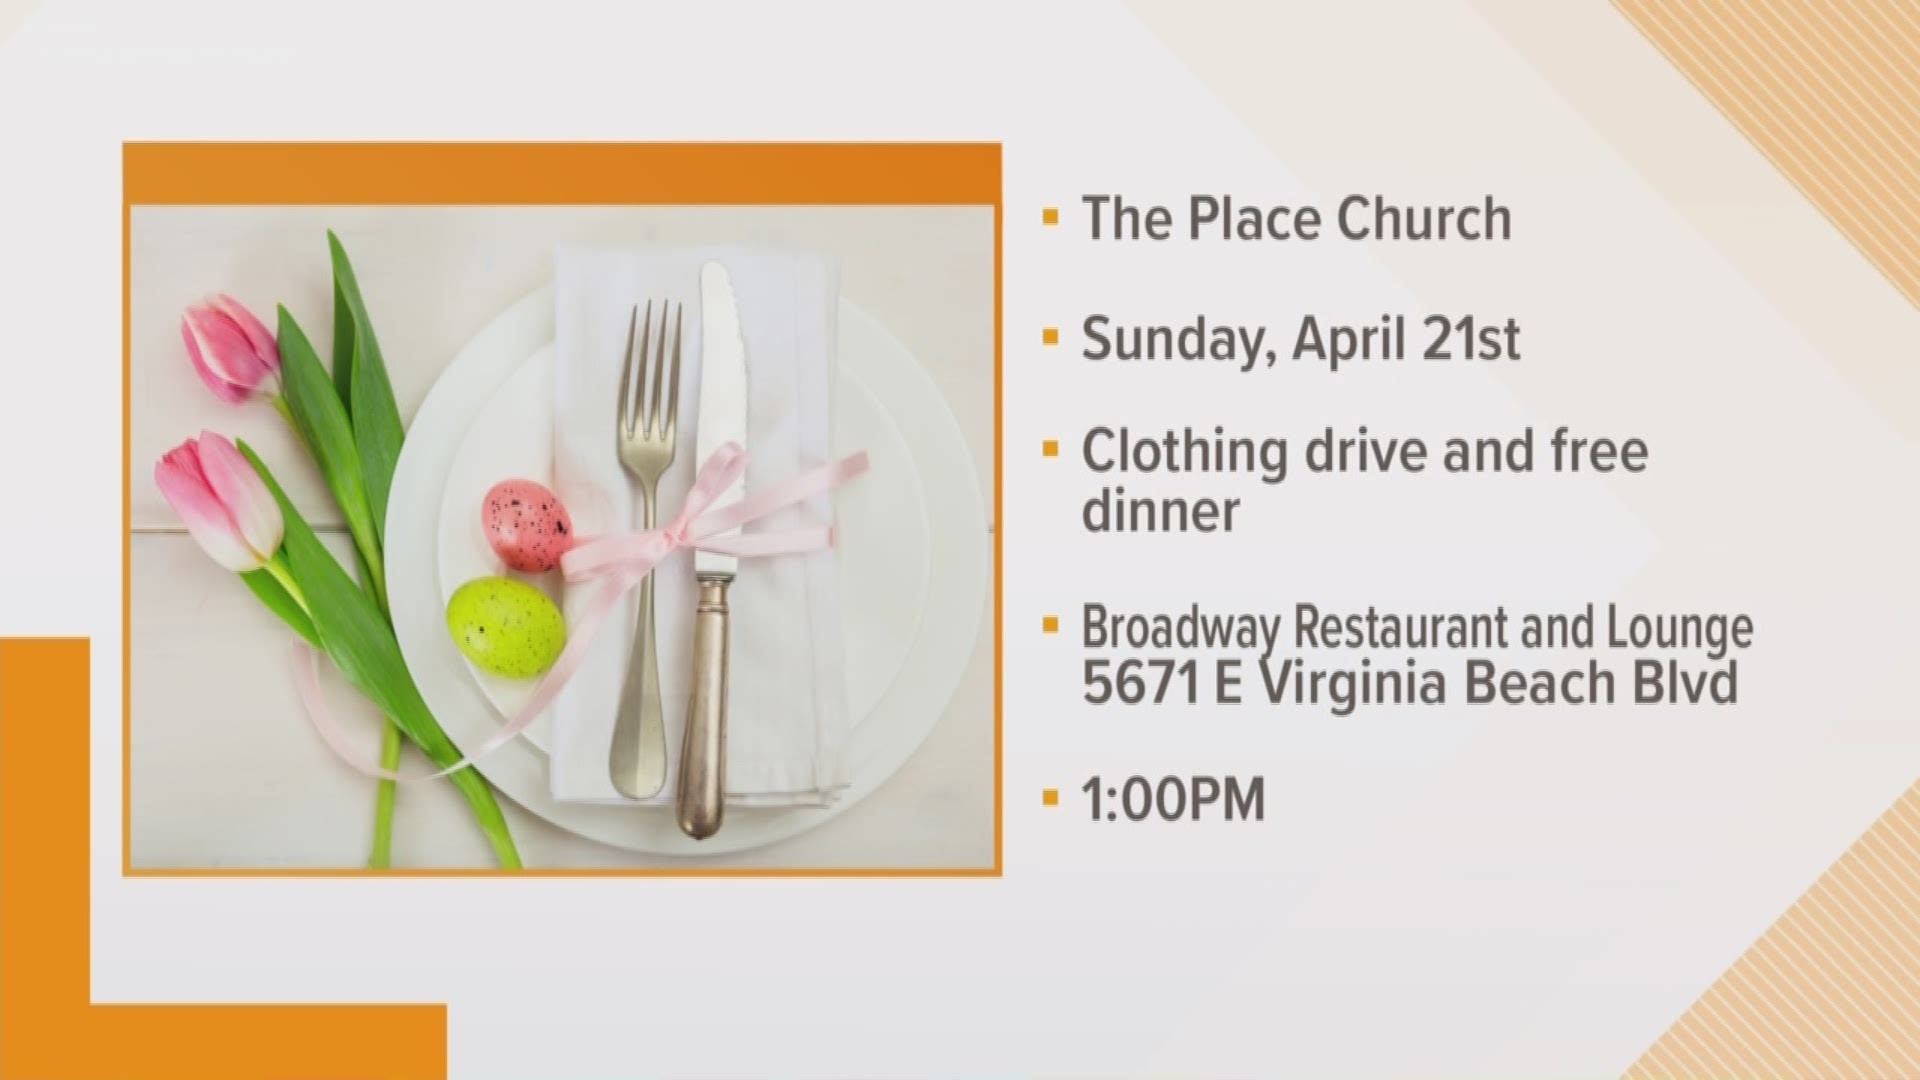 A local church is hosting a community service event.